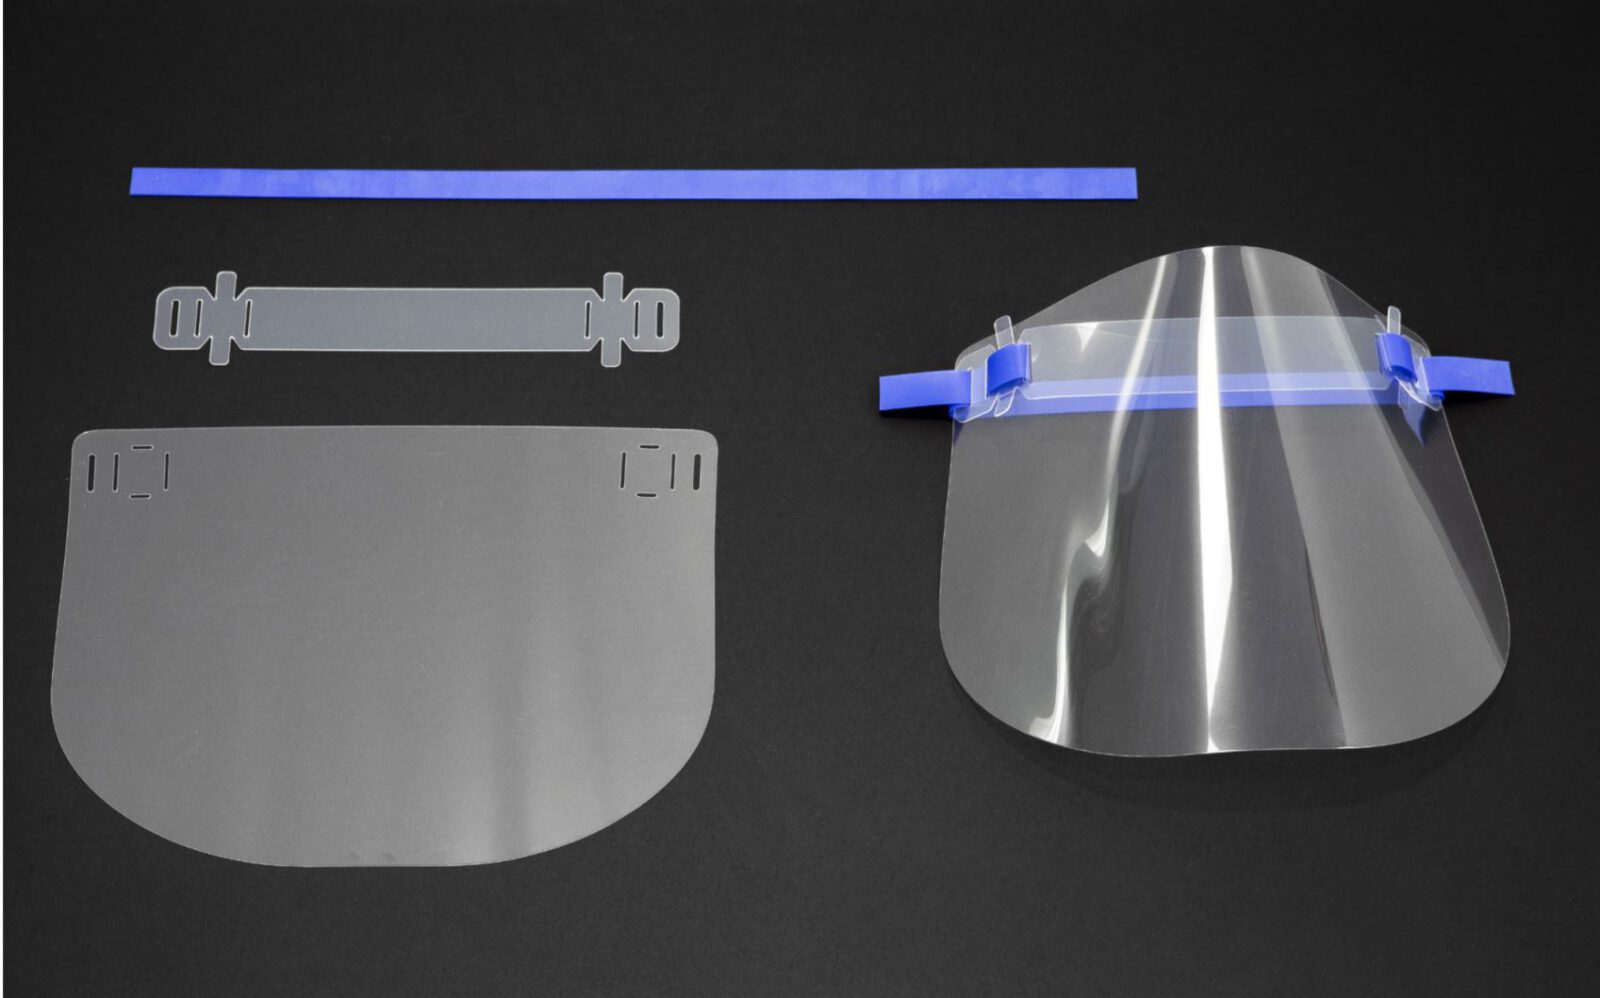 Archisearch Foster + Partners shares the prototype design for a reusable face visor